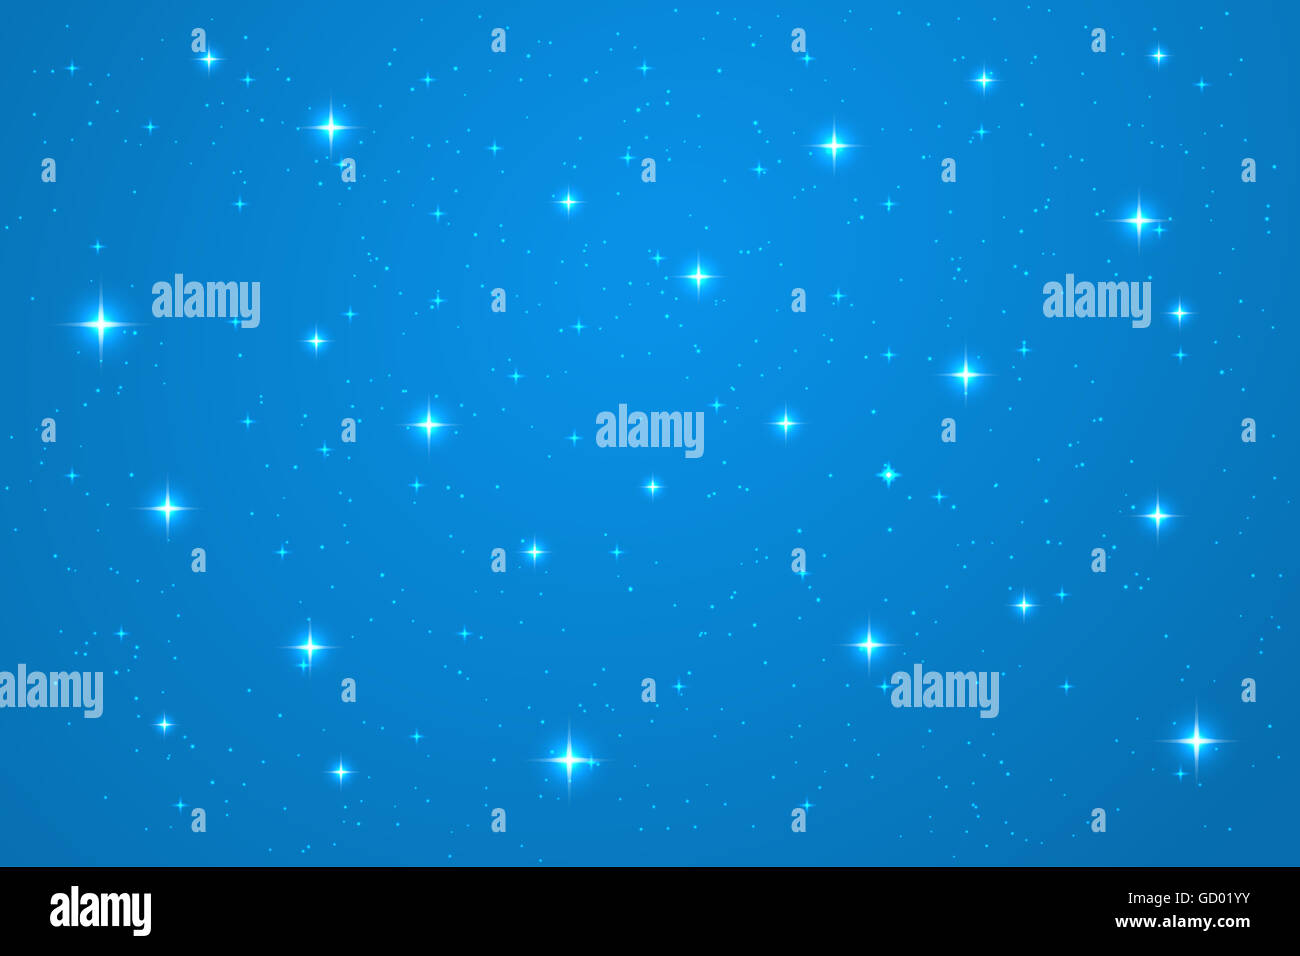 Blue night horizontal background. Abstract template Stock Photo